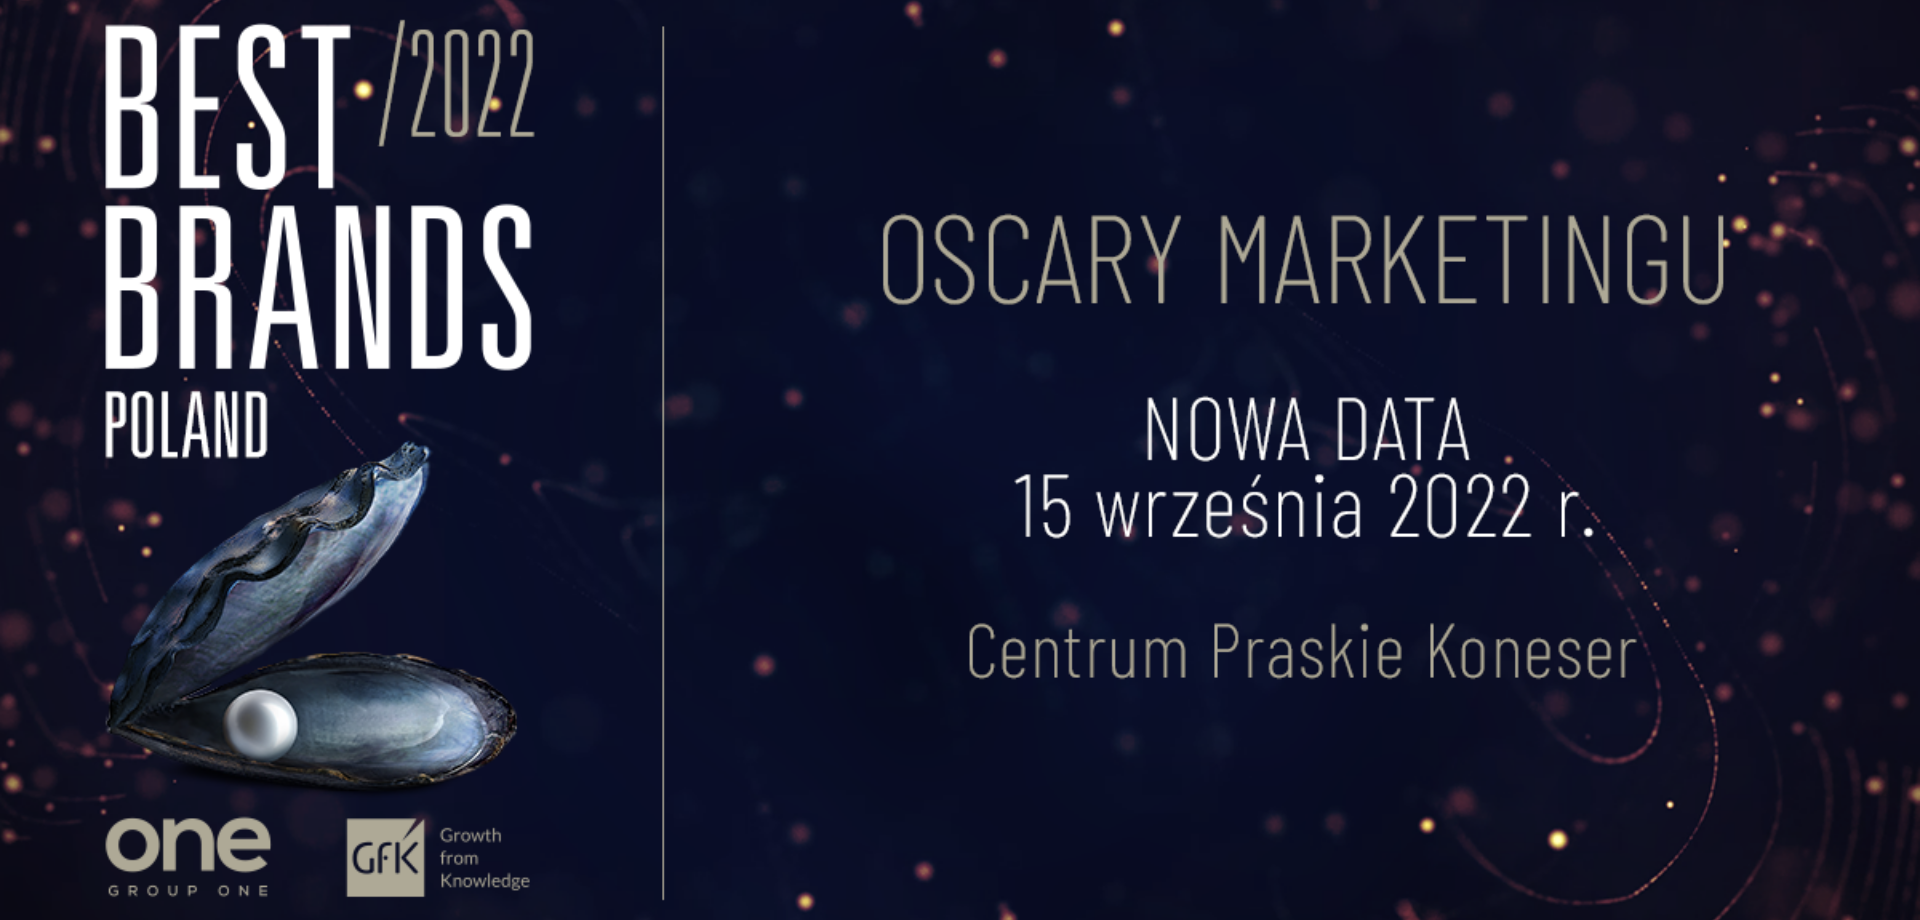 Best Brands Awards for the first time in Poland. 